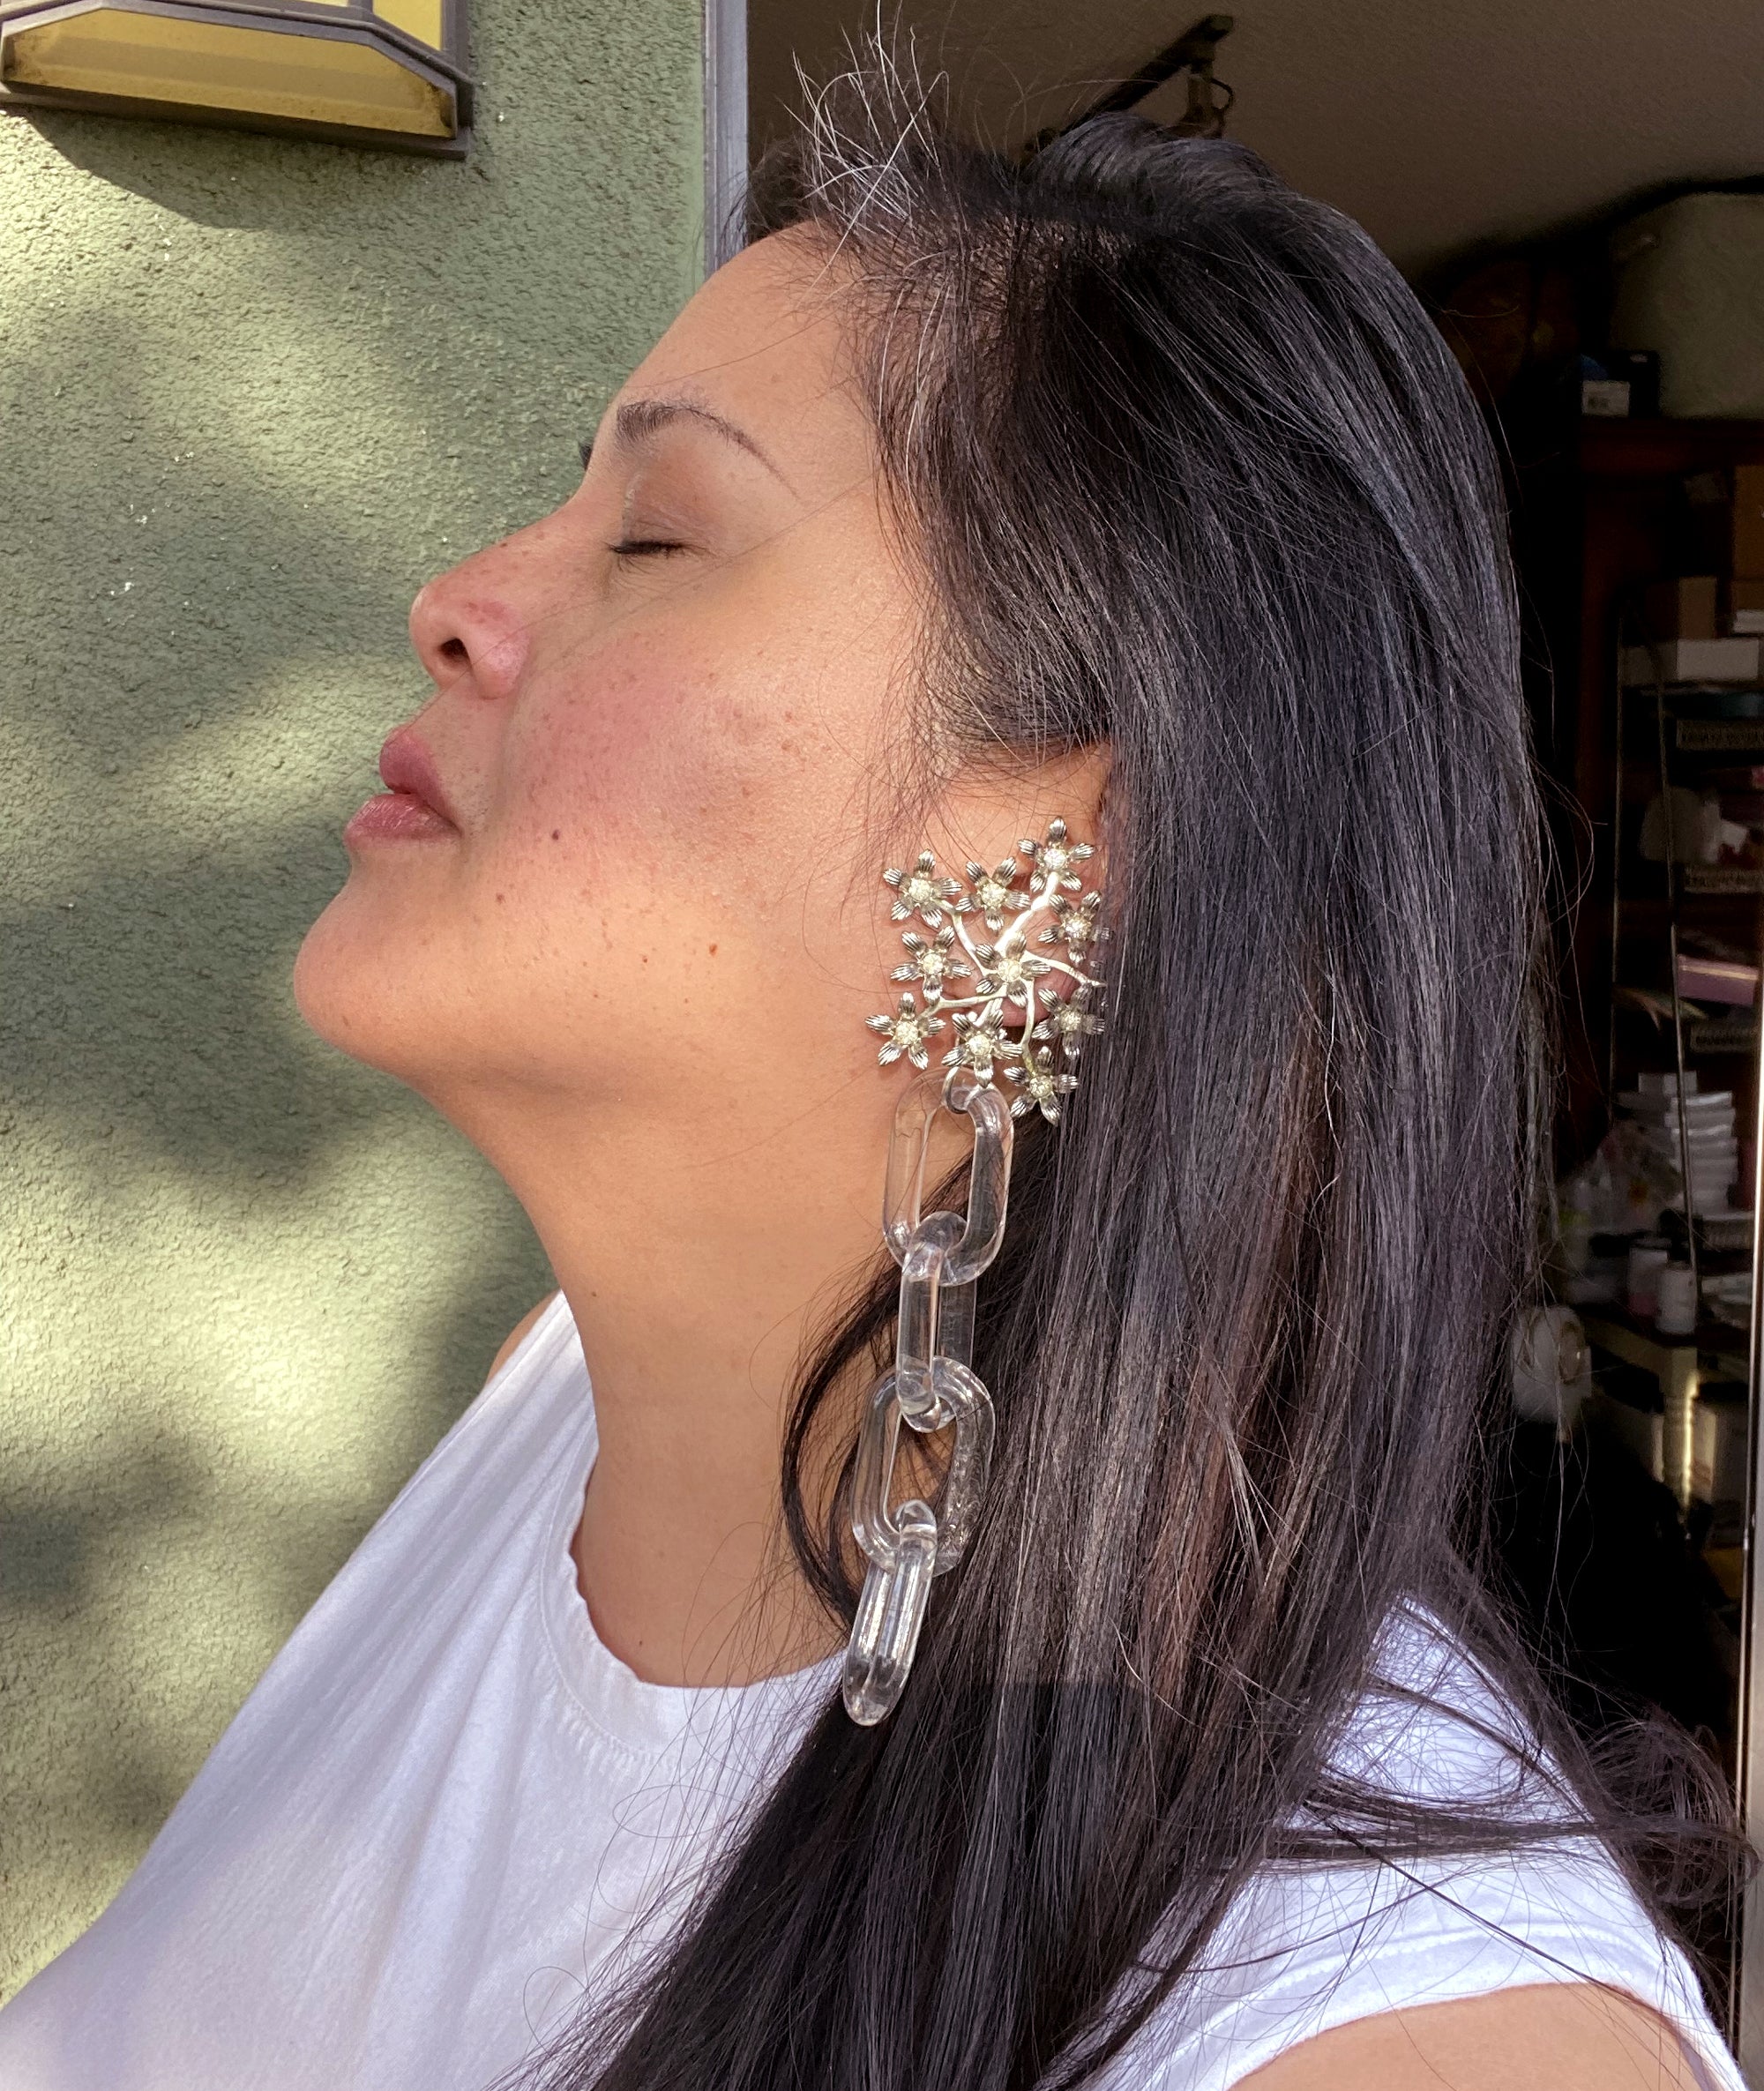 Jenny Dayco wearing silver rhinestone flower and clear chain earrings